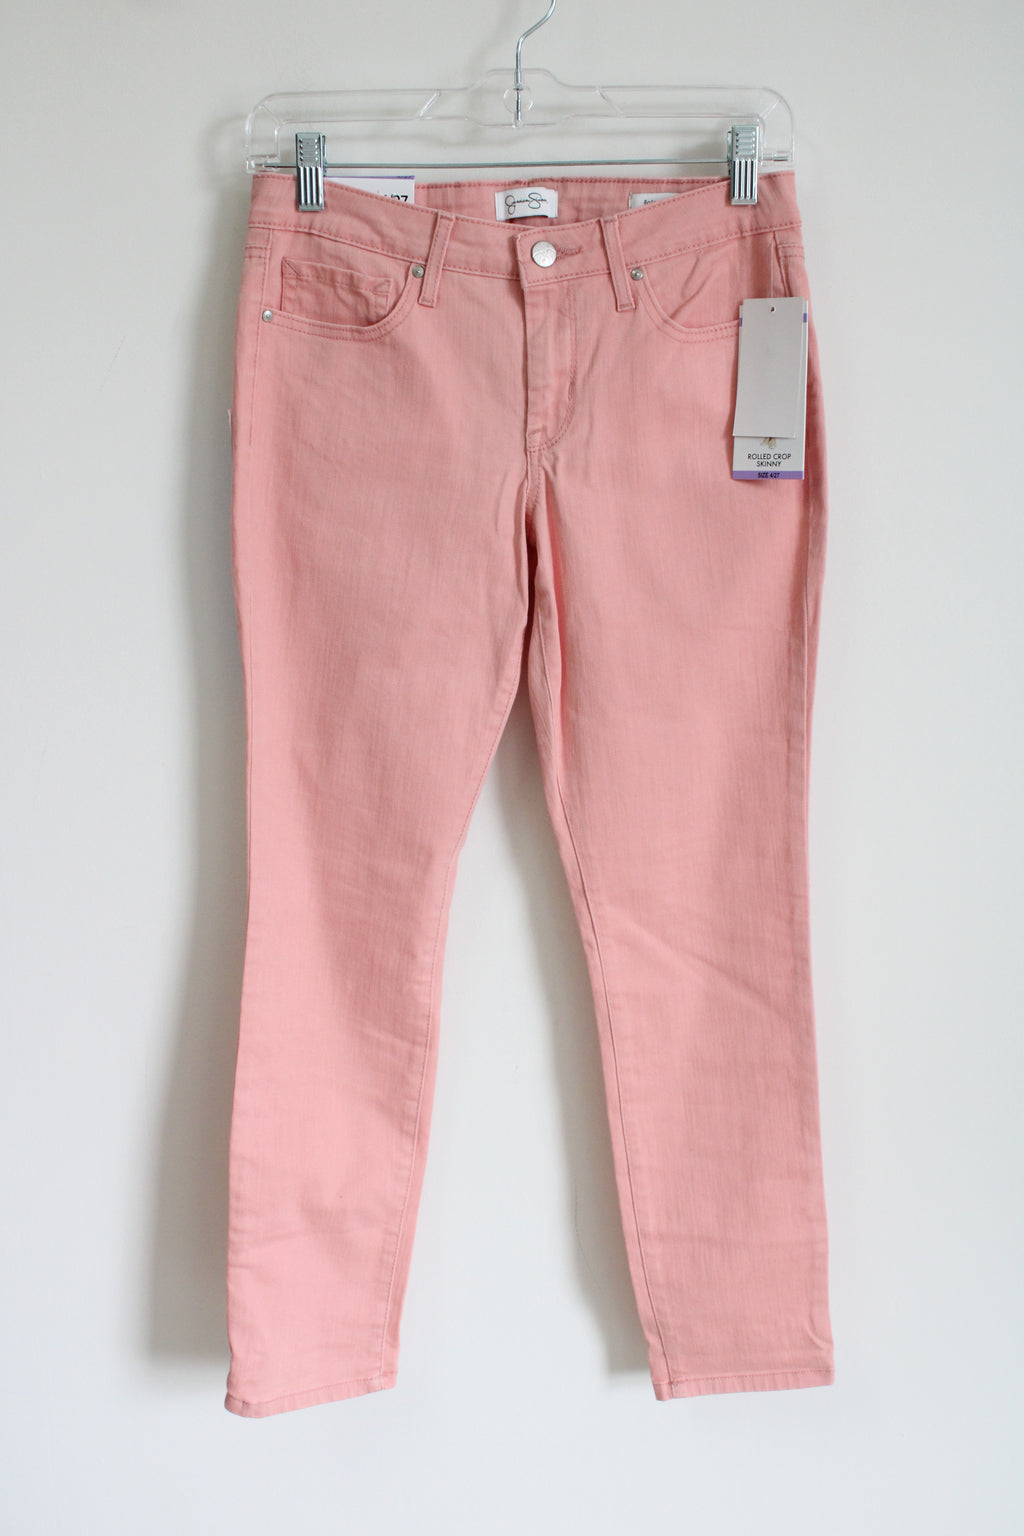 NEW Jessica Simpson Rolled Crop Skinny Pink Jeans | 4